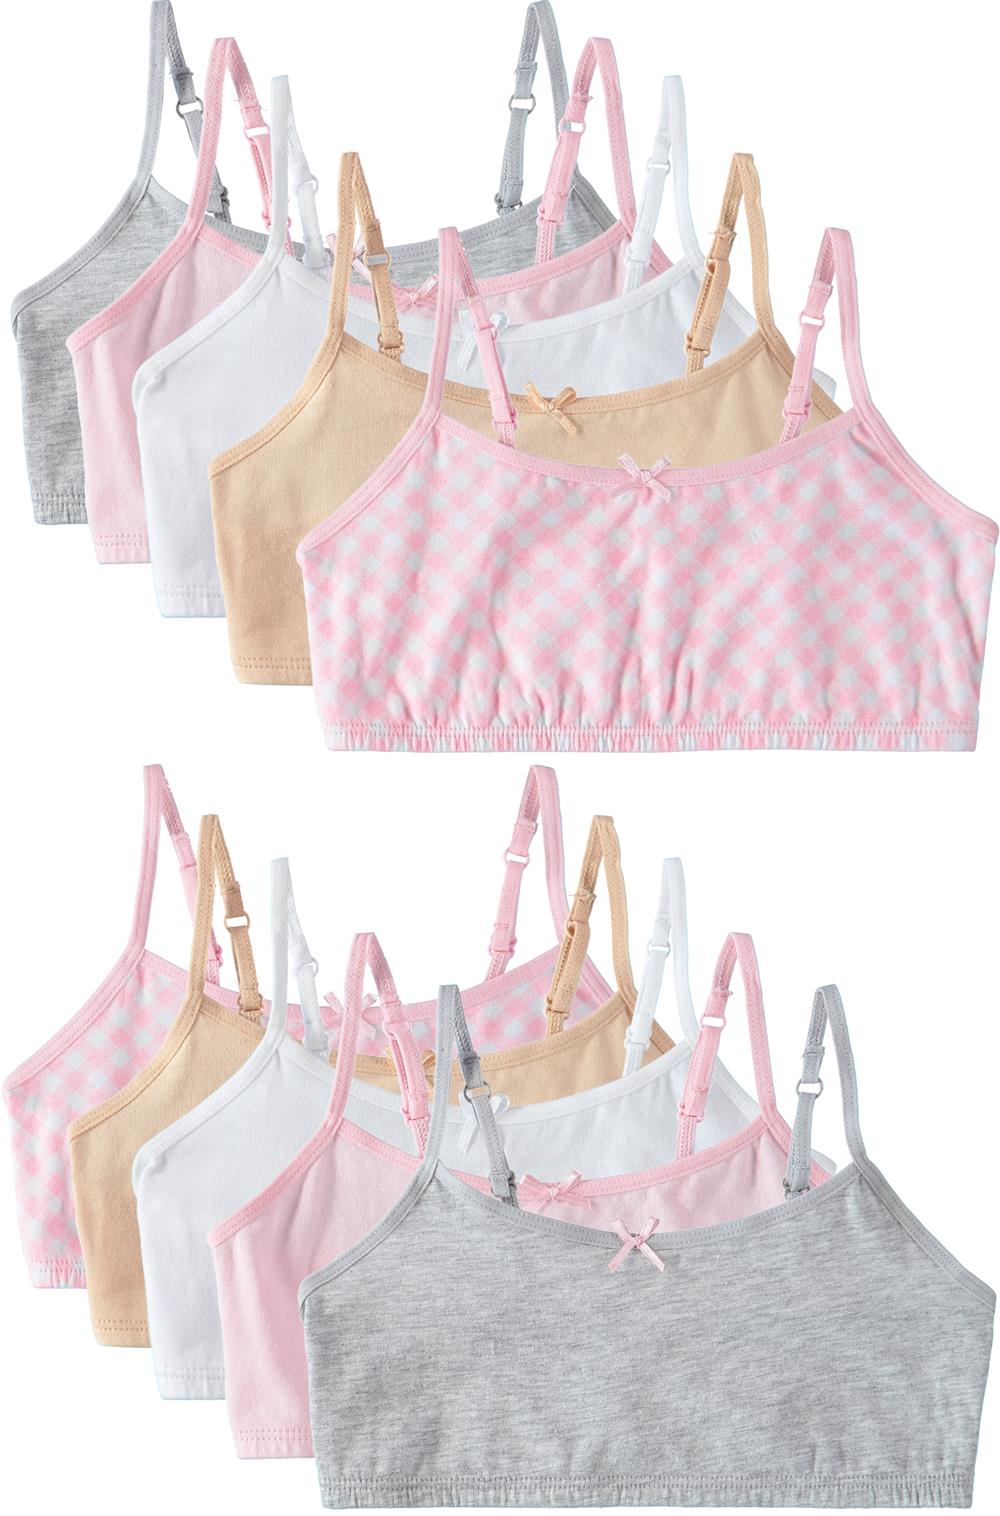 Delia*s Girl 2-Pack Bras w/ Removable Pads Size 7/8 Pink And Gray